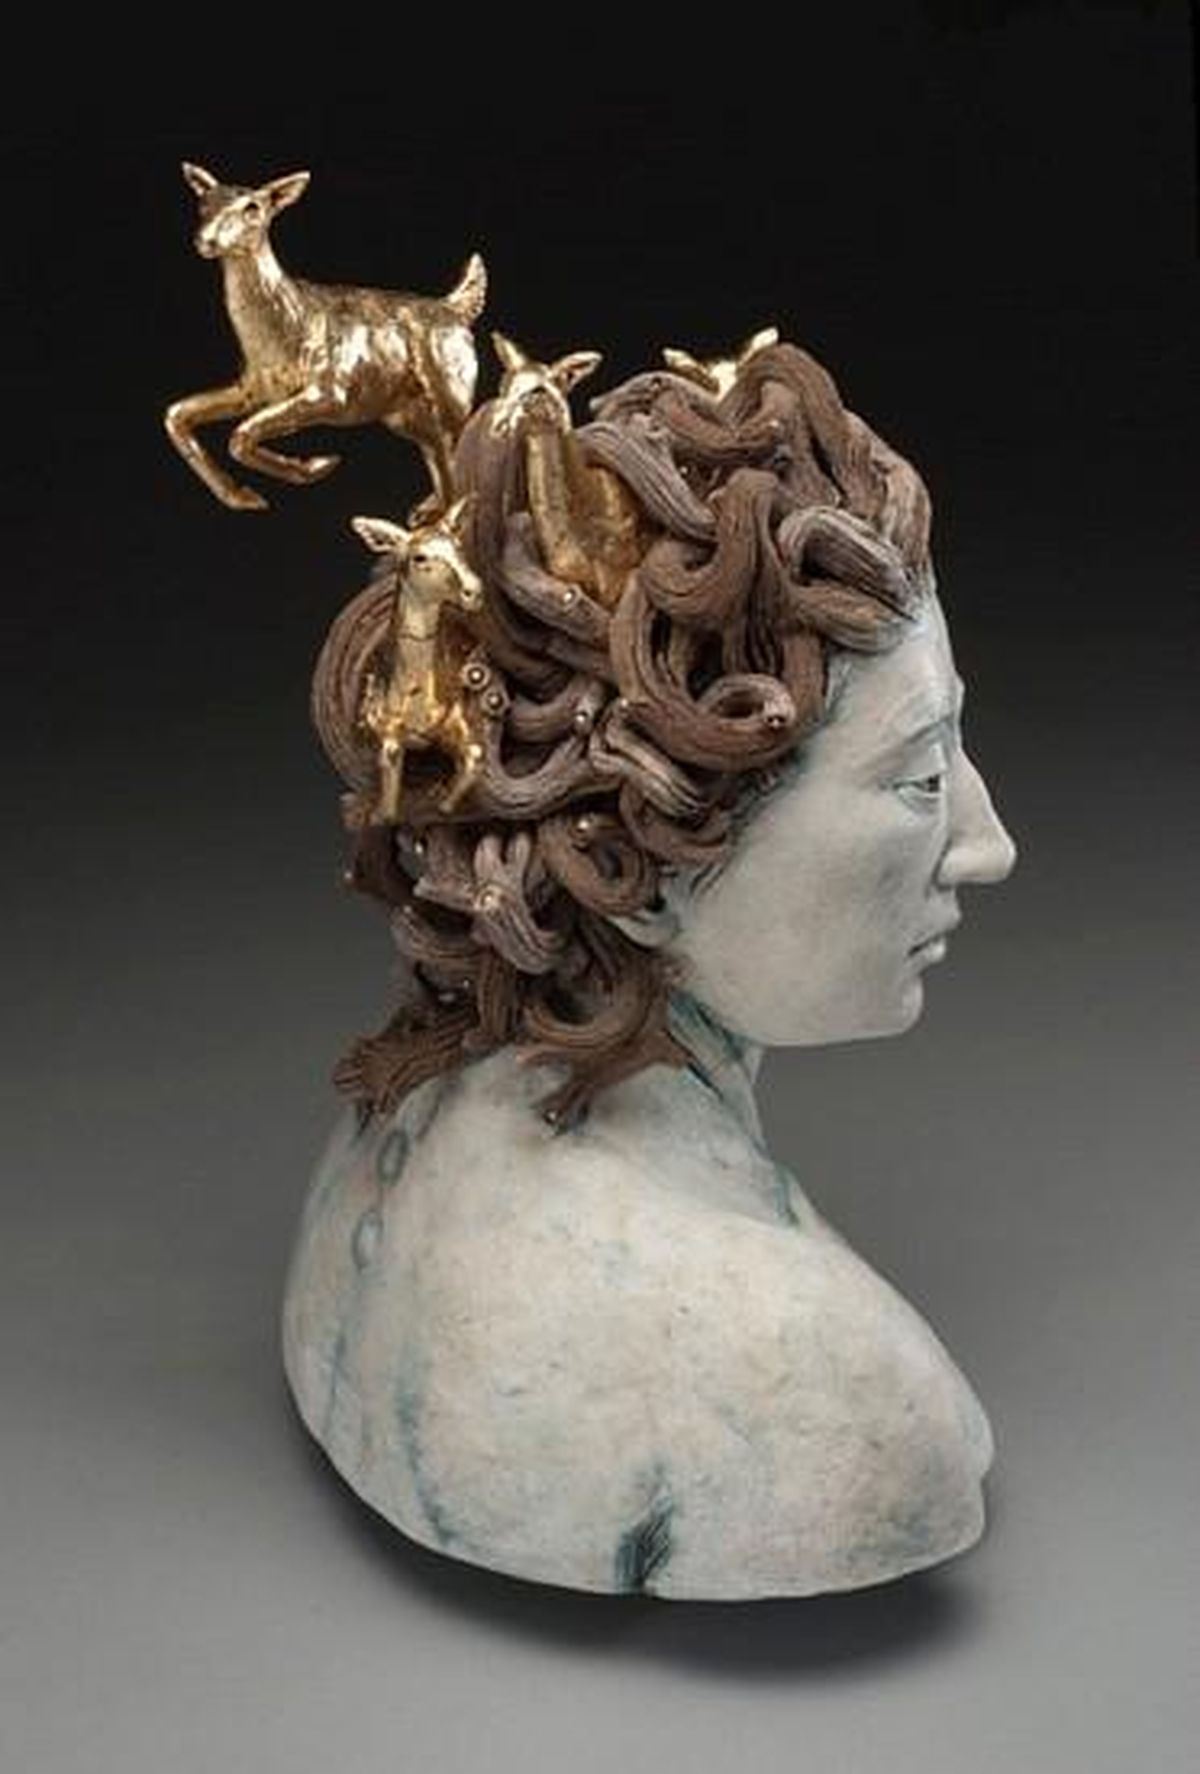 Adrian Arleo’s “Brambles” is is featured in “The Great Ceramics Revival” at the Art Spirit Gallery in Coeur d’Alene in April. (Adrian Arleo)